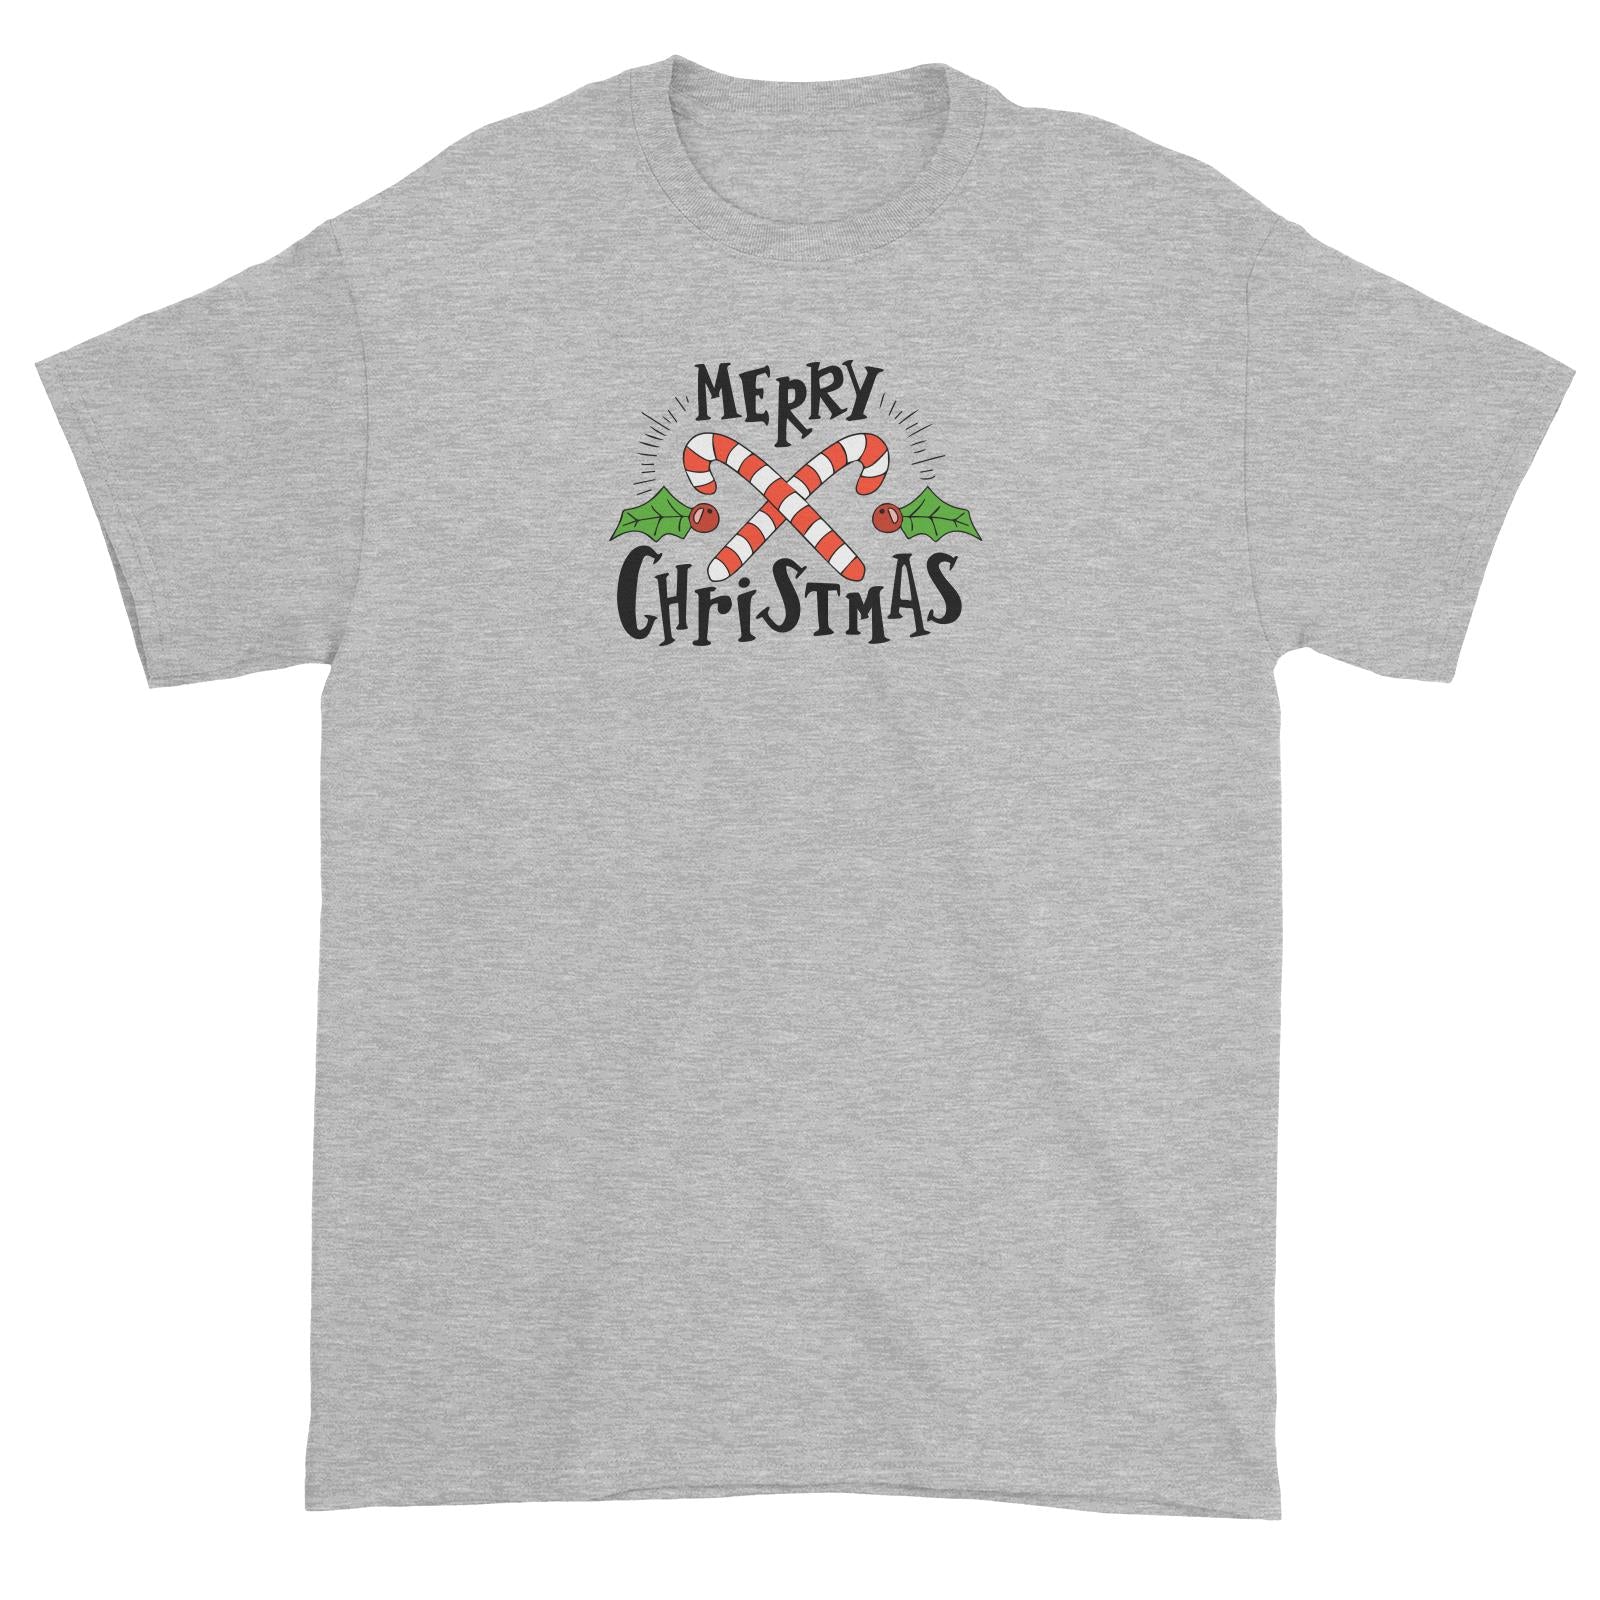 Merry Chrismas with Holly and Candy Cane Greeting Unisex T-Shirt Christmas Matching Family Lettering